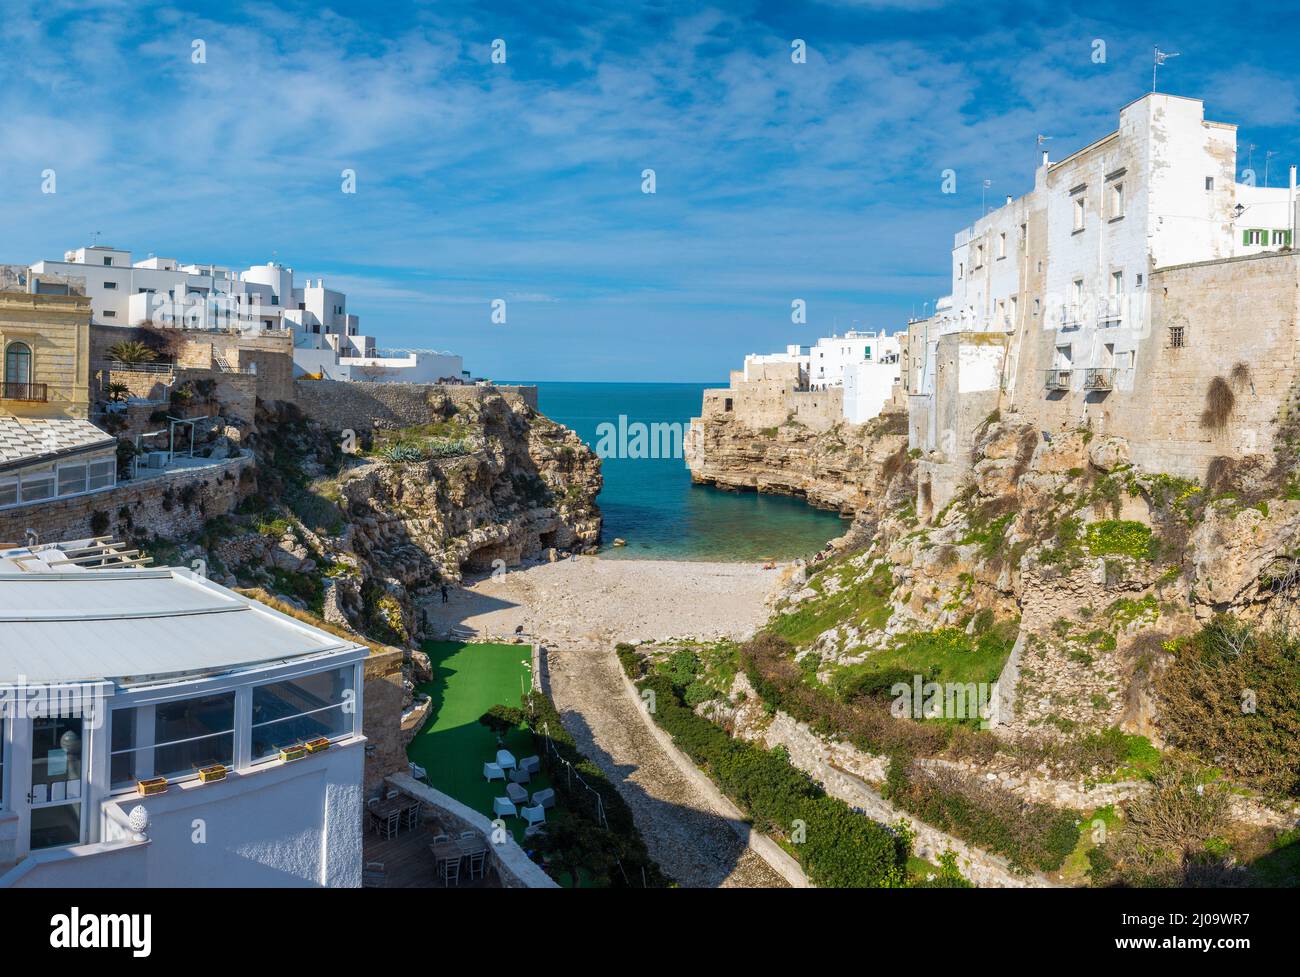 Polignano a Mare - The town over the clifs. Stock Photo